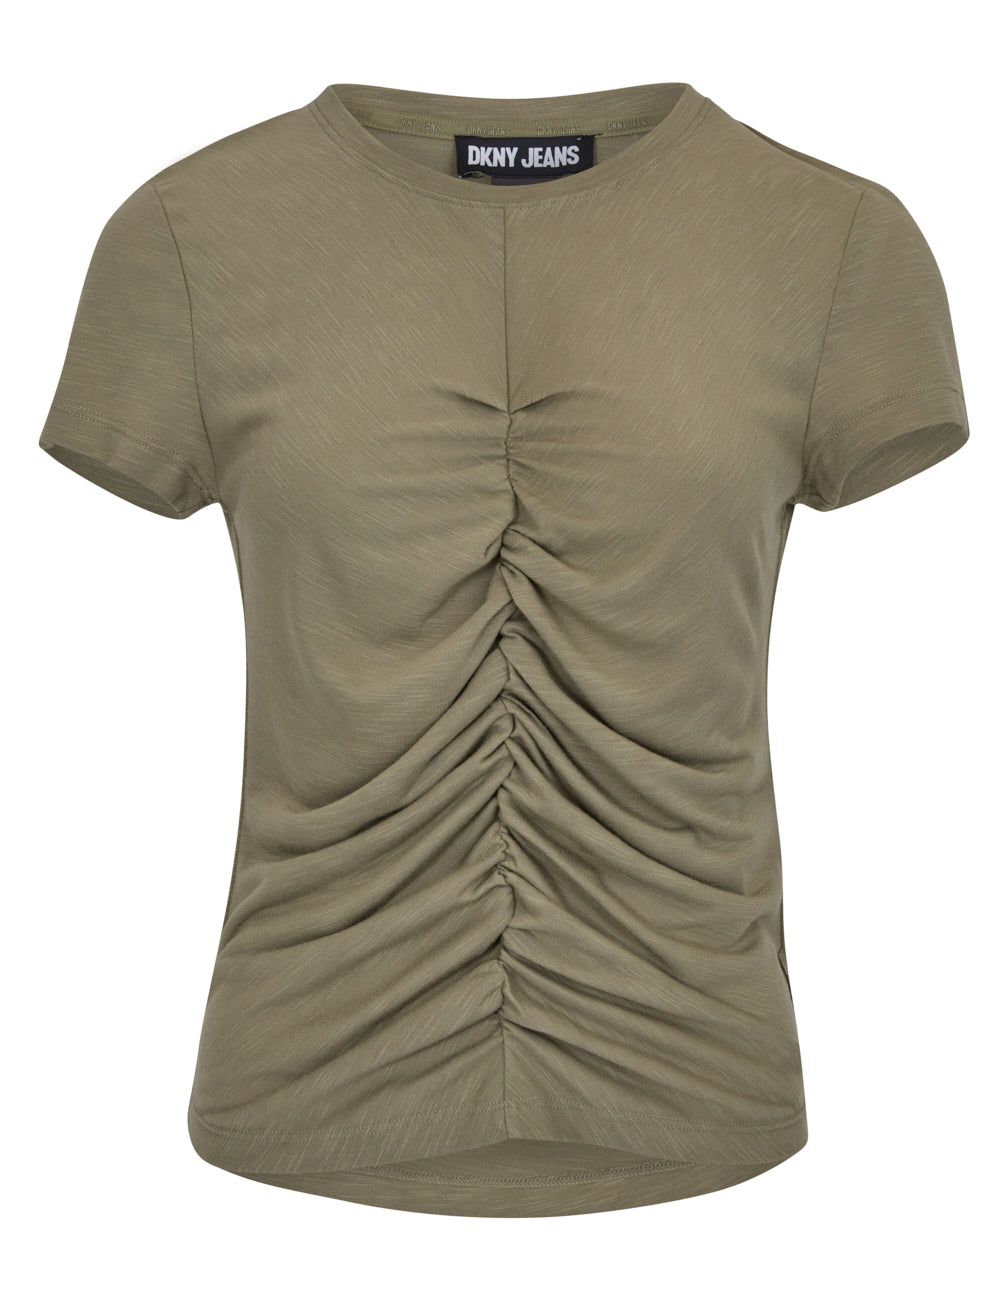 DKNY-Jeans-Poly Viscose Ruch Top-Dark-Olive-1